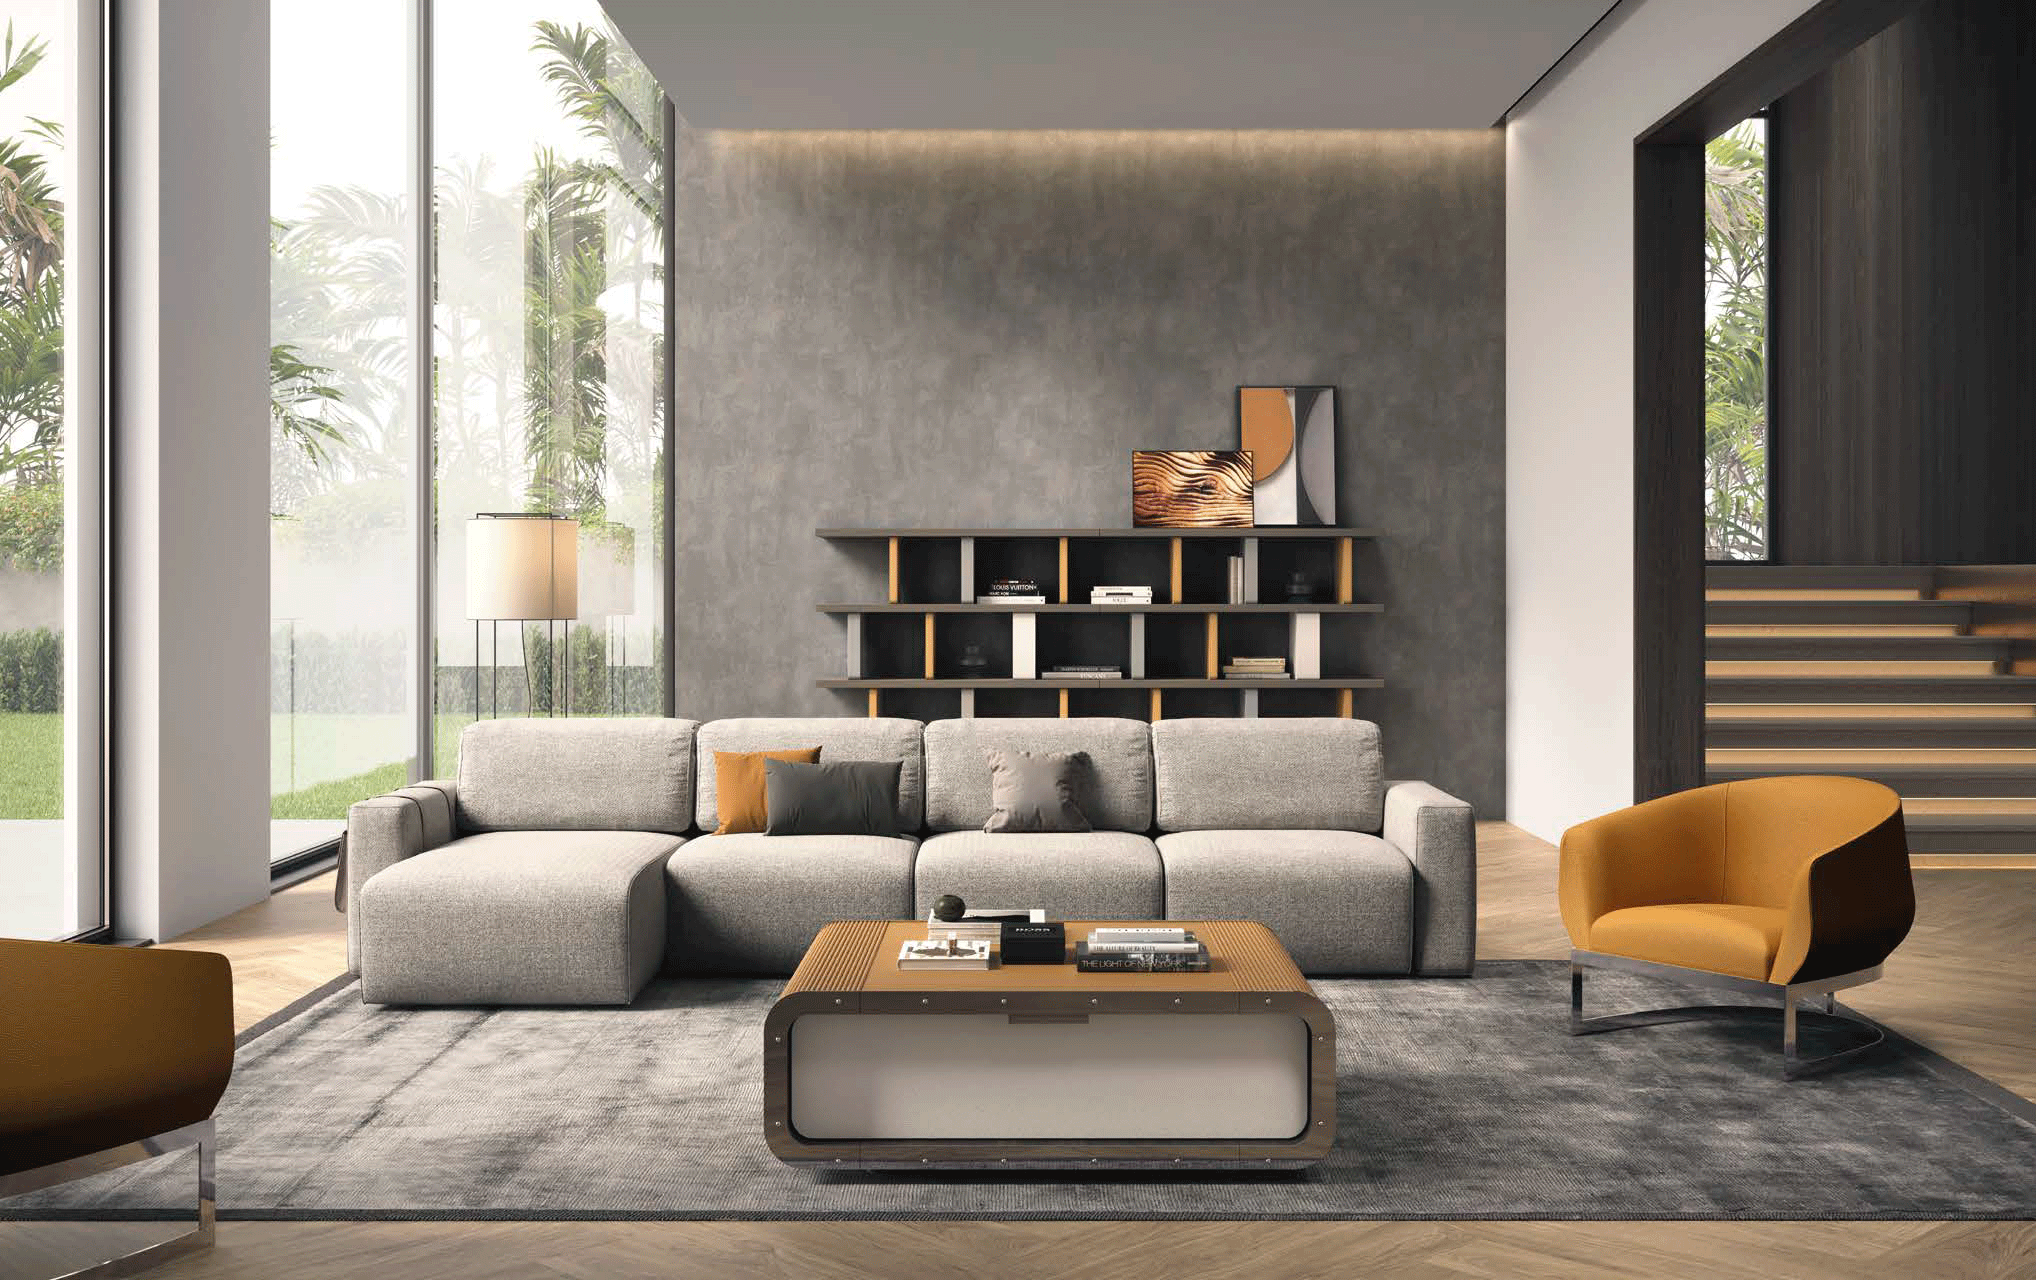 Living Room Furniture Sleepers Sofas Loveseats and Chairs Cosmopol Living room